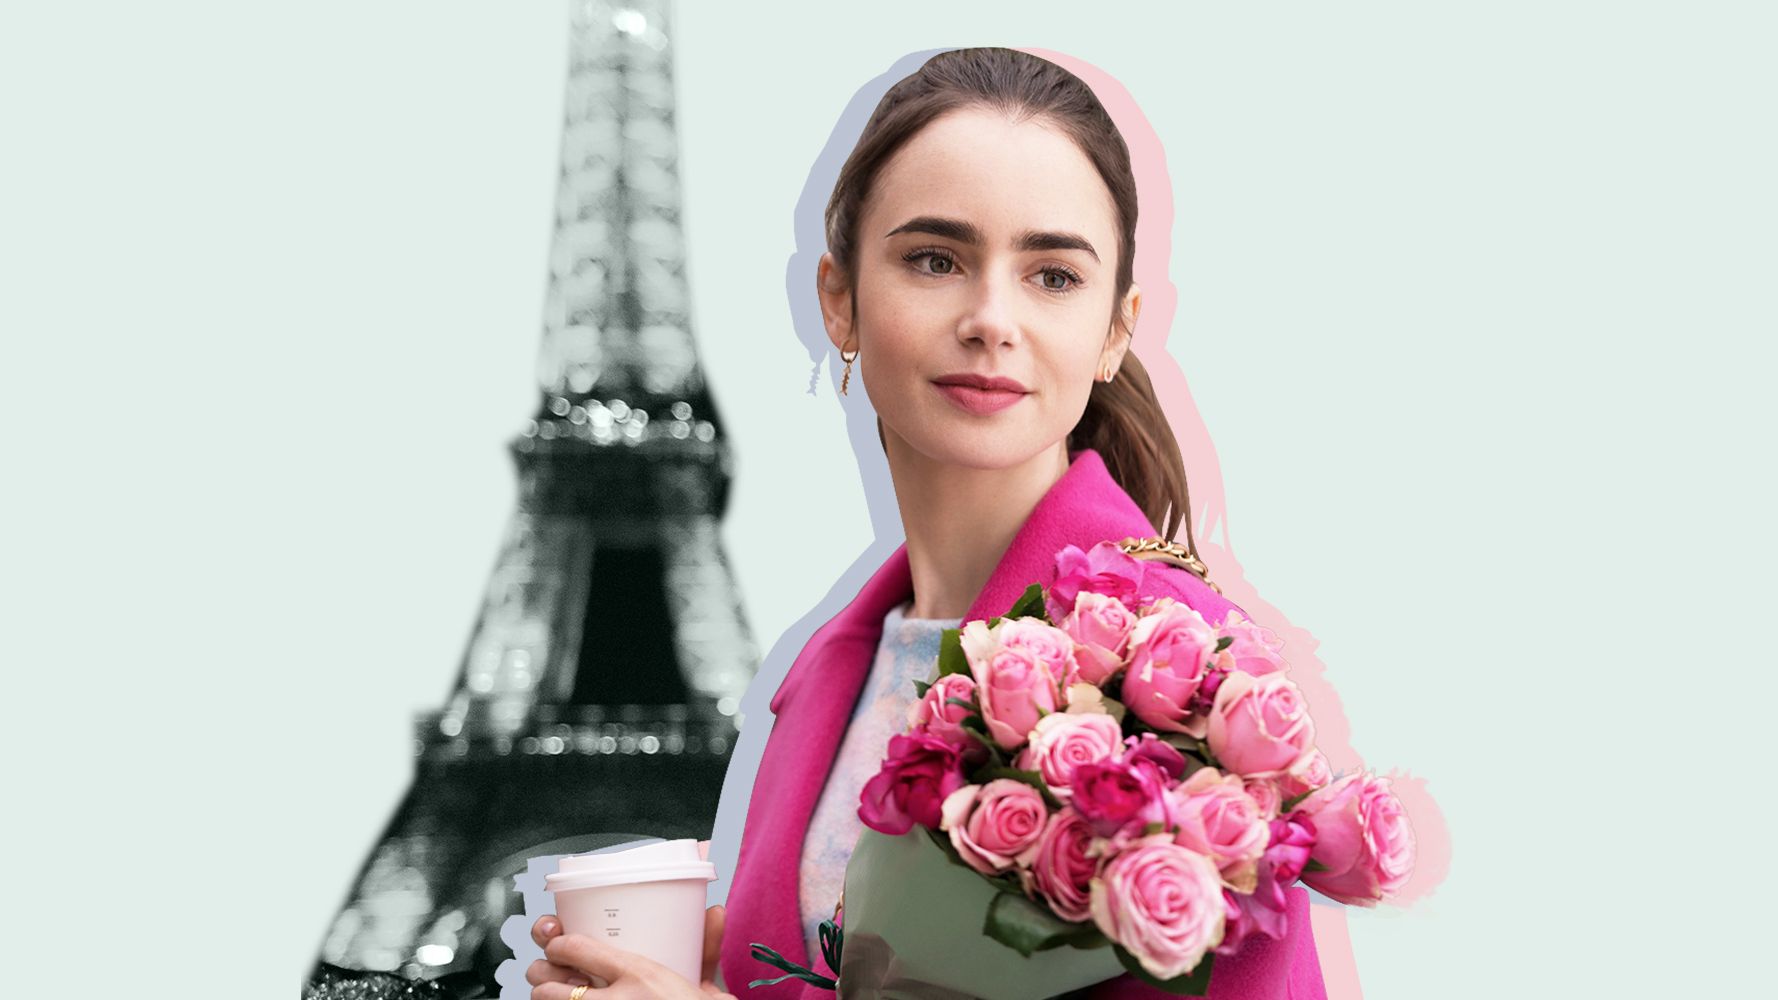 Emily in Paris' Season 3: Cast, Details, Spoilers, Release Date, and More  Details